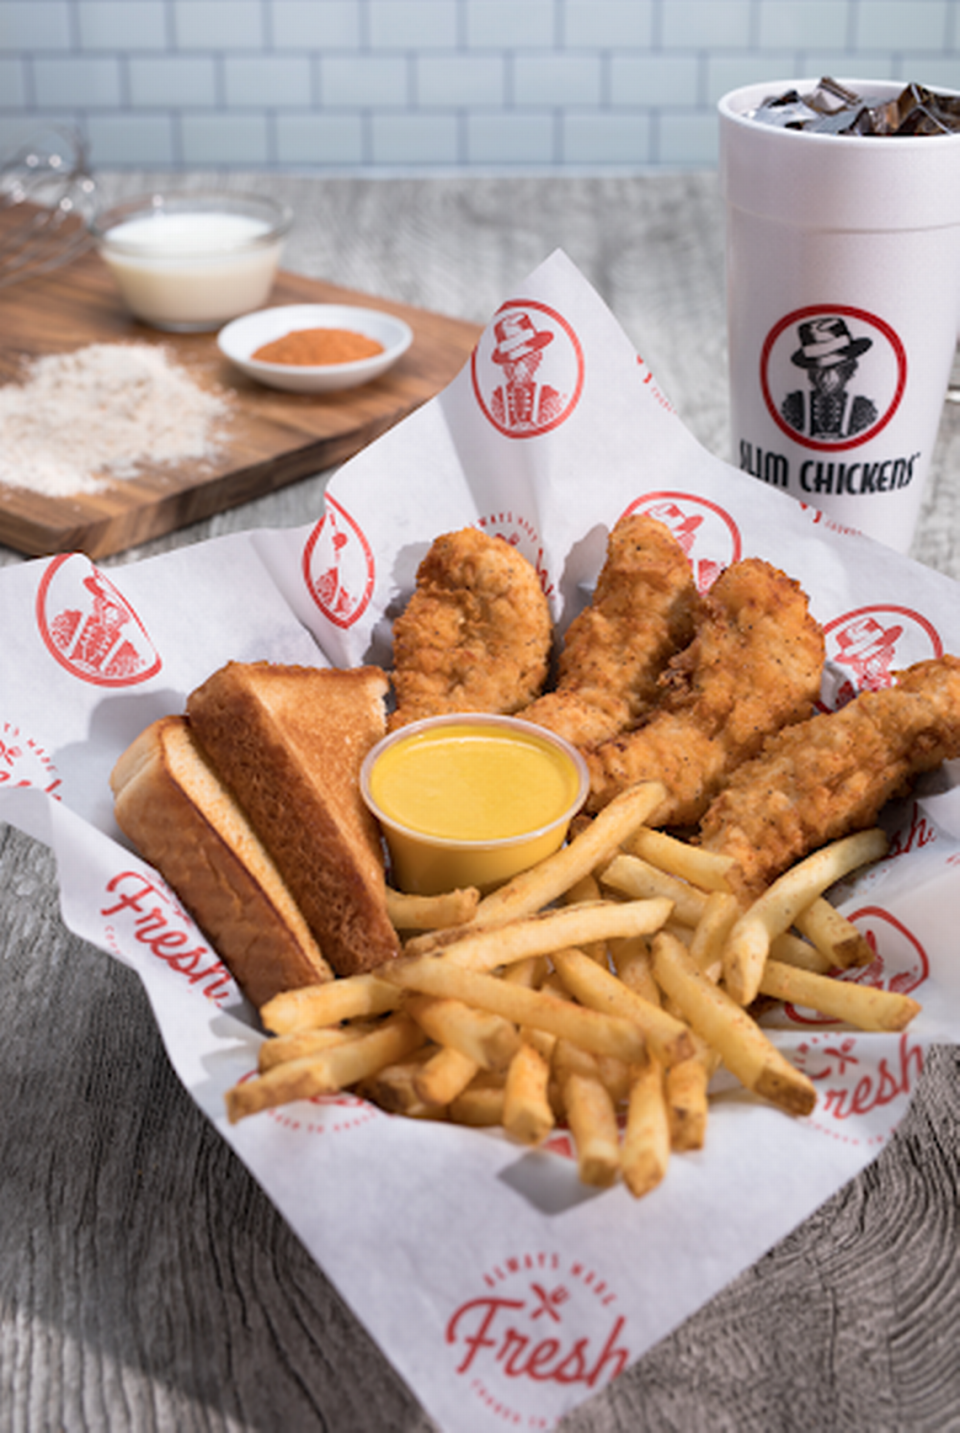 Fast-casual chain Slim Chickens opened across from St. Joseph Hospital serving chicken fingers and more and will soon open a second Lexington location on Richmond Road, alongside a 7 Brew coffee kiosk, where the O’Charley’s was torn down.